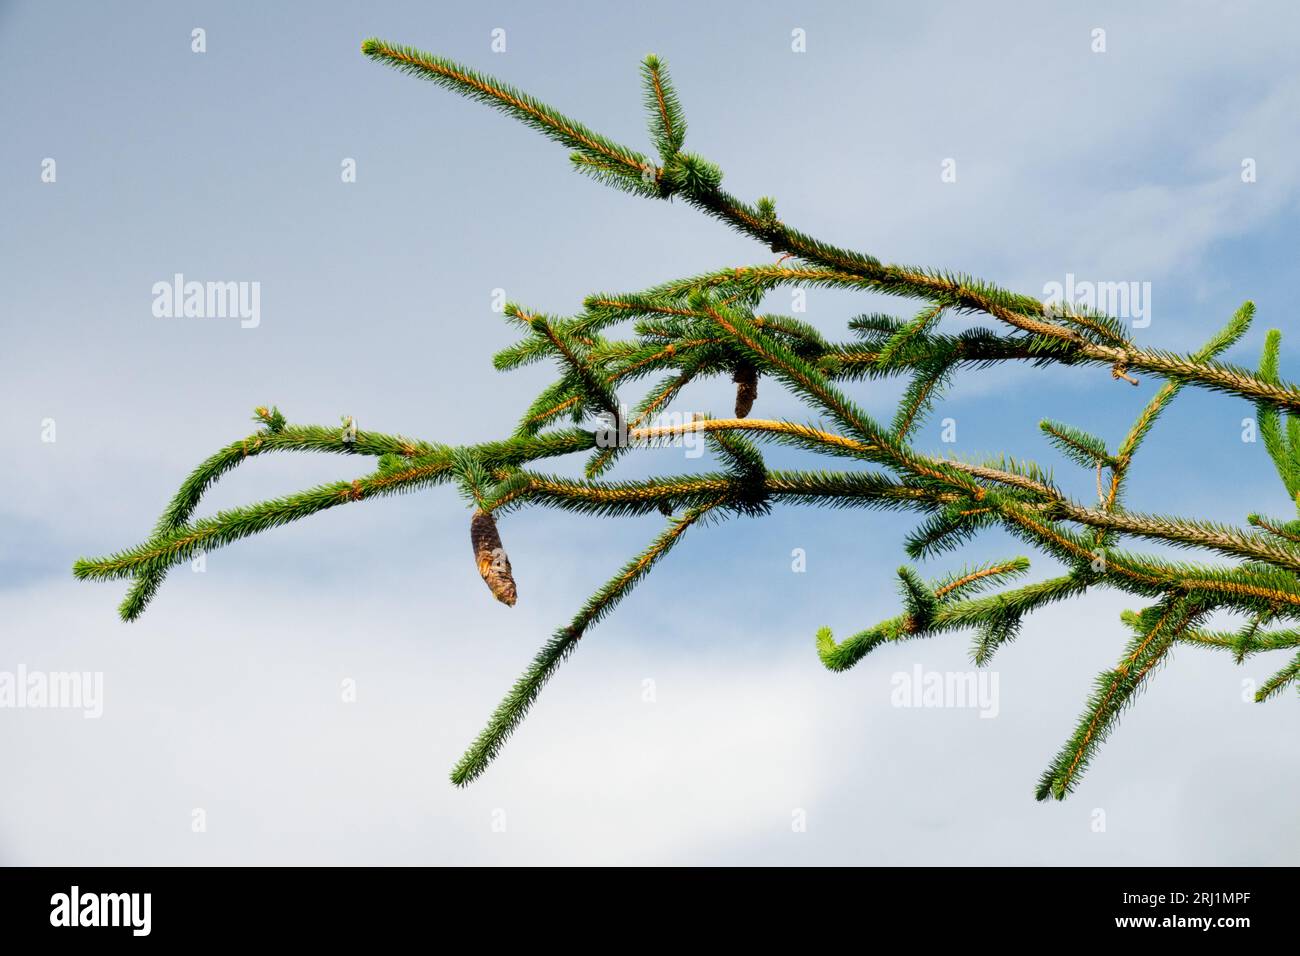 Norway spruce, Picea abies 'Cranstonii', Narrow, Branches Stock Photo